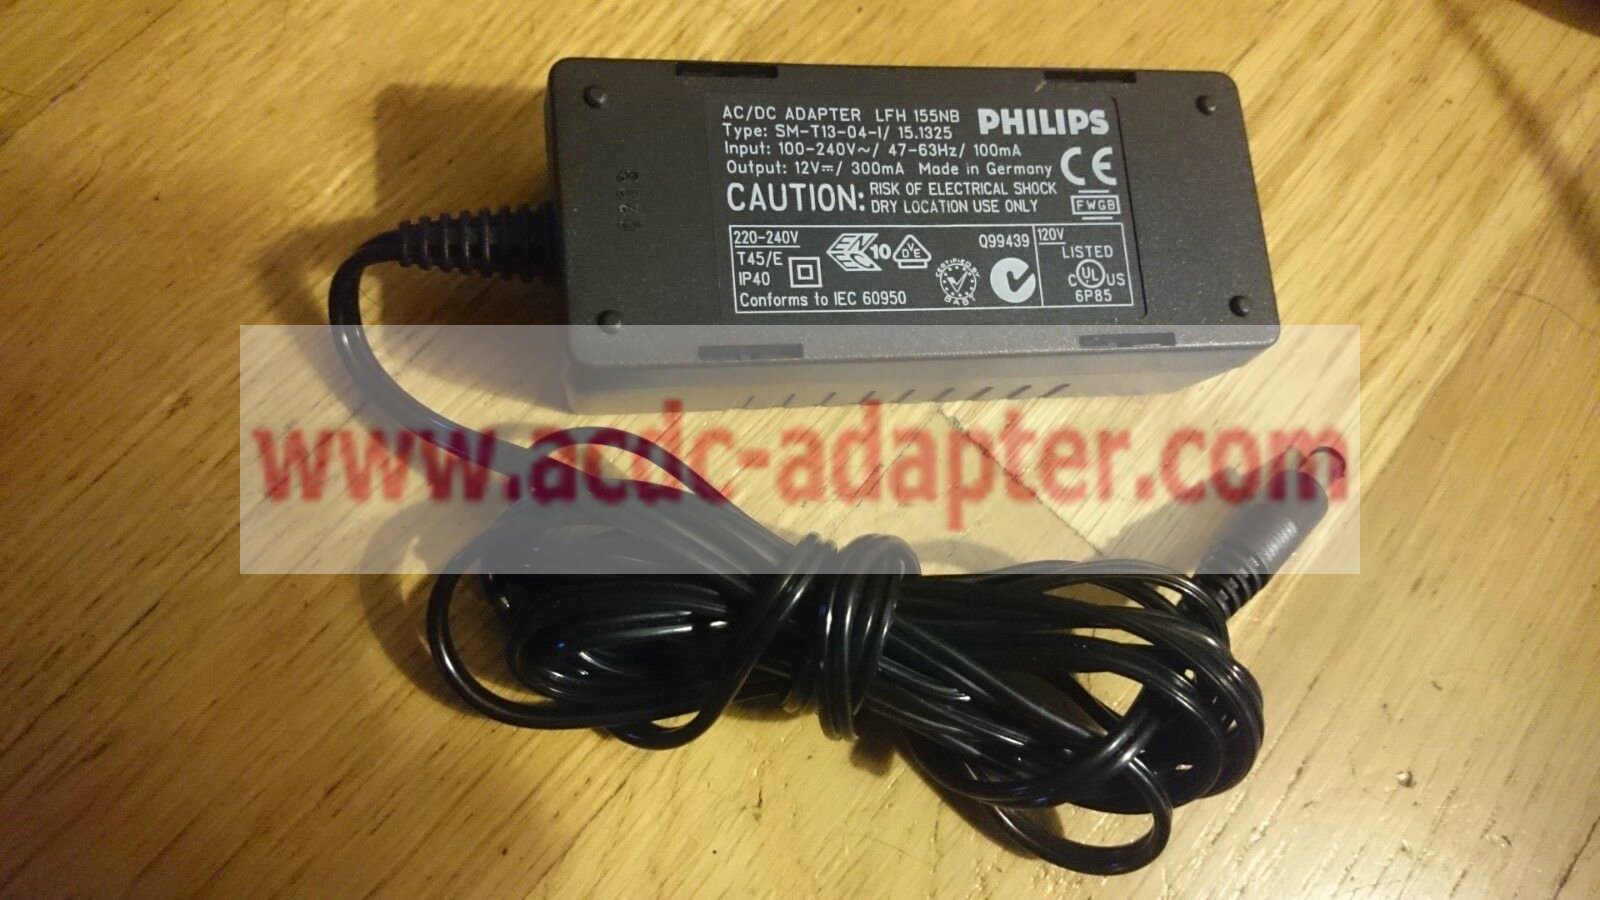 New PHILIPS LFH 155NB AC ADAPTER 12V 0.3A SM-T13-04-I / 15.1325 power supply